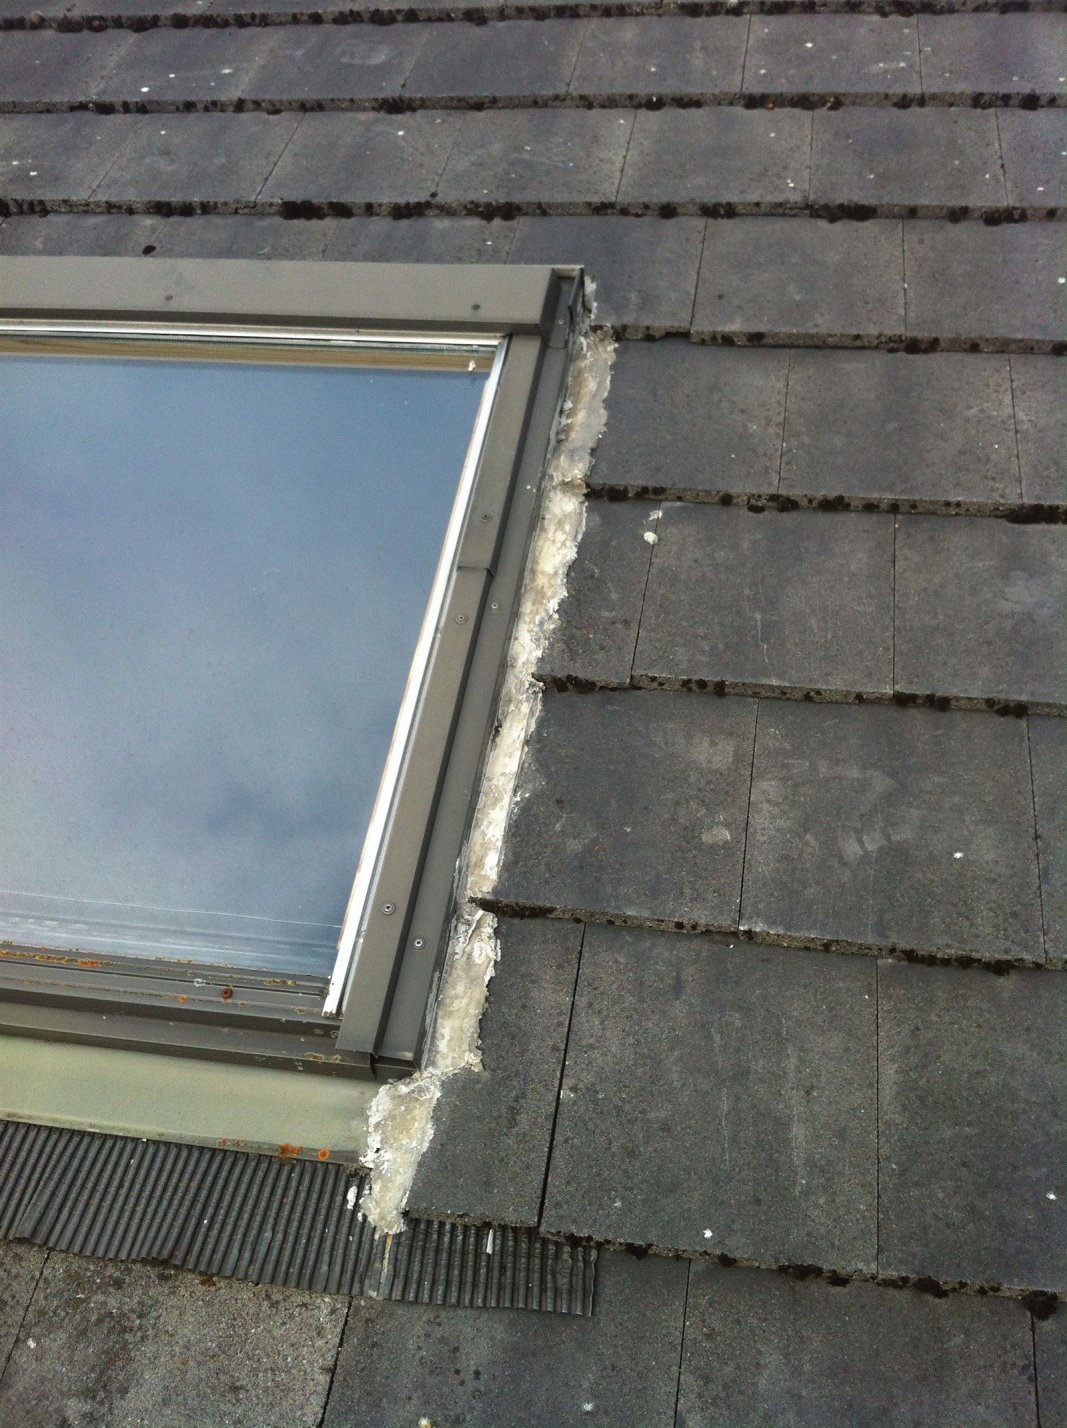 Velux windows come with a flashing that is designed to keep rain and snow out safely. Blocking these with mortar will only lead to further problems.